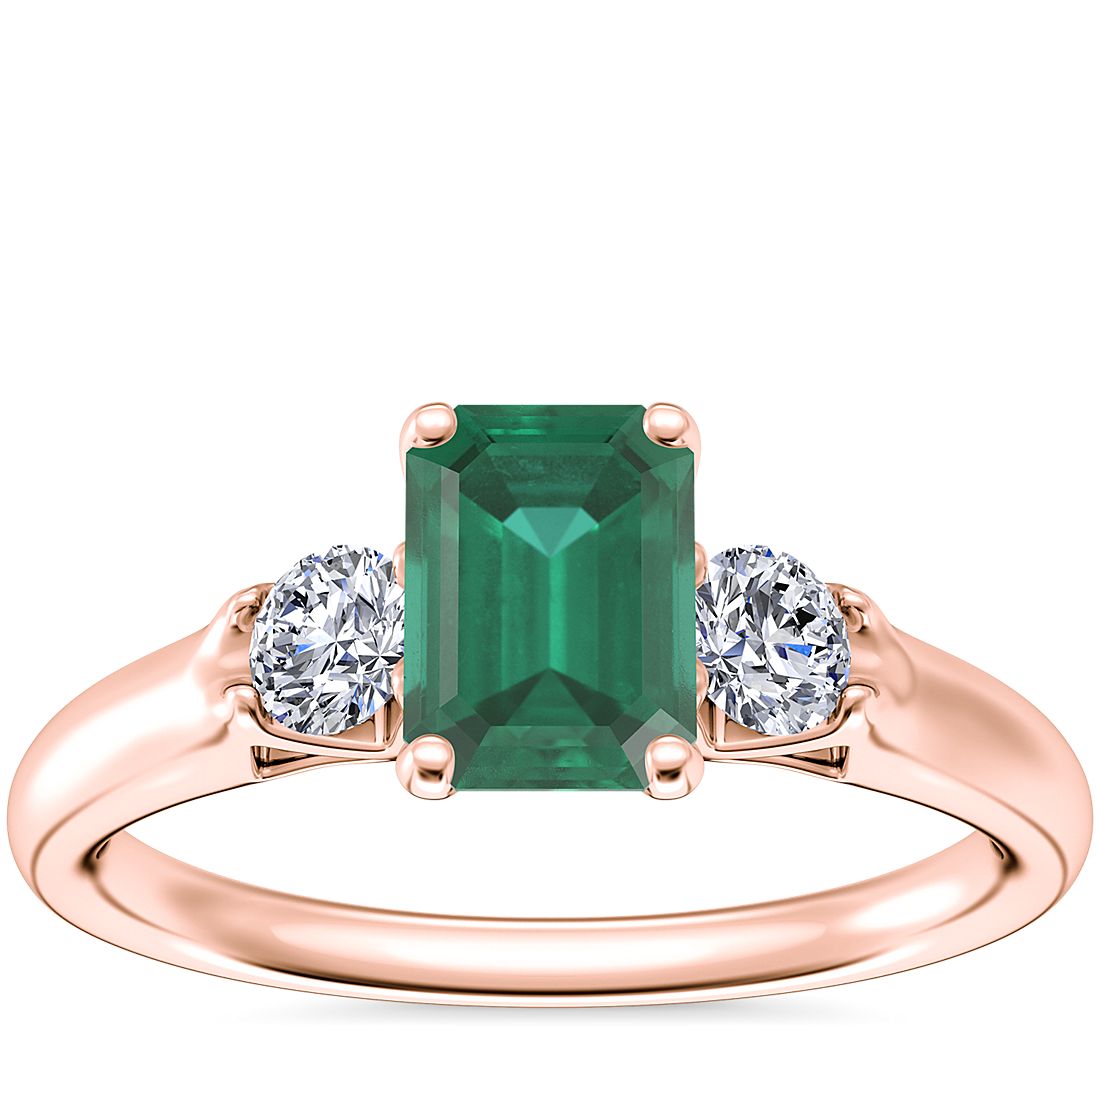 Classic Three Stone Engagement Ring with Emerald-Cut Emerald in 18k Rose Gold (7x5mm)